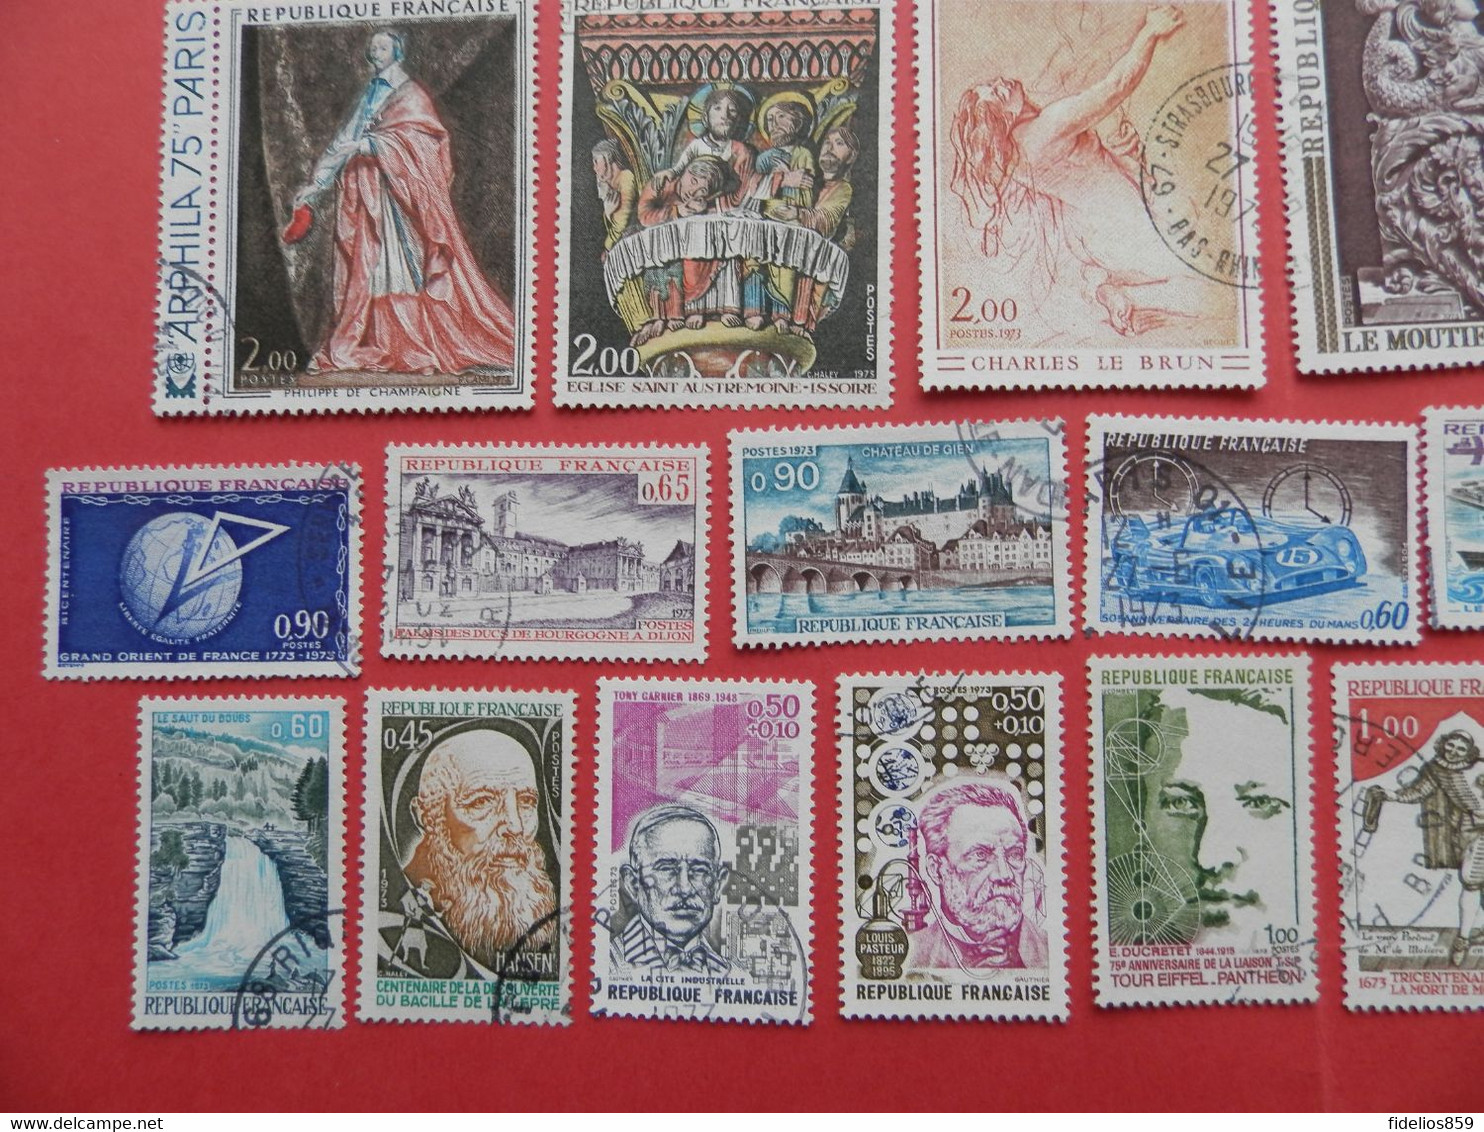 FRANCE OBLITERES LUXE : ANNEE COMPLETE 1973 SOIT 46 TIMBRES POSTE DIFFERENTS + PA 48 - 1970-1979